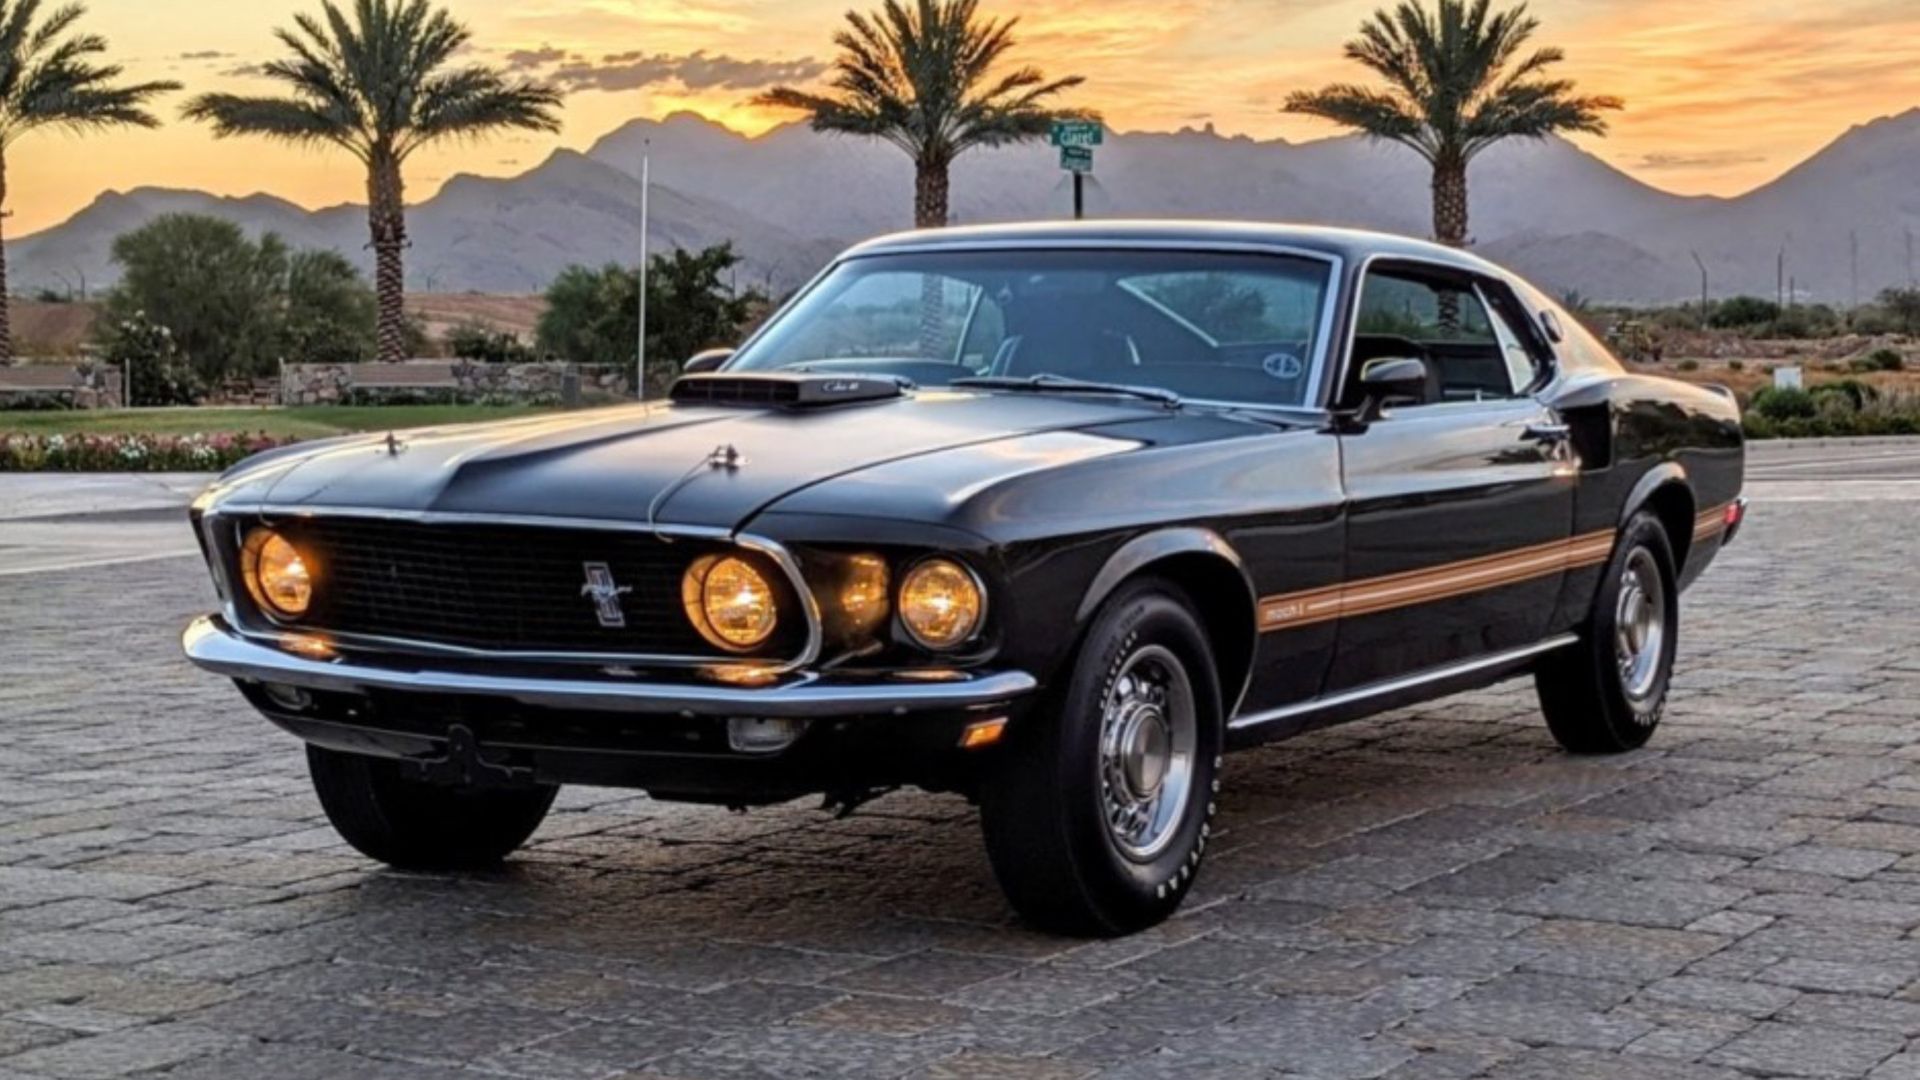 1969 Ford Mustang Mach 1 black